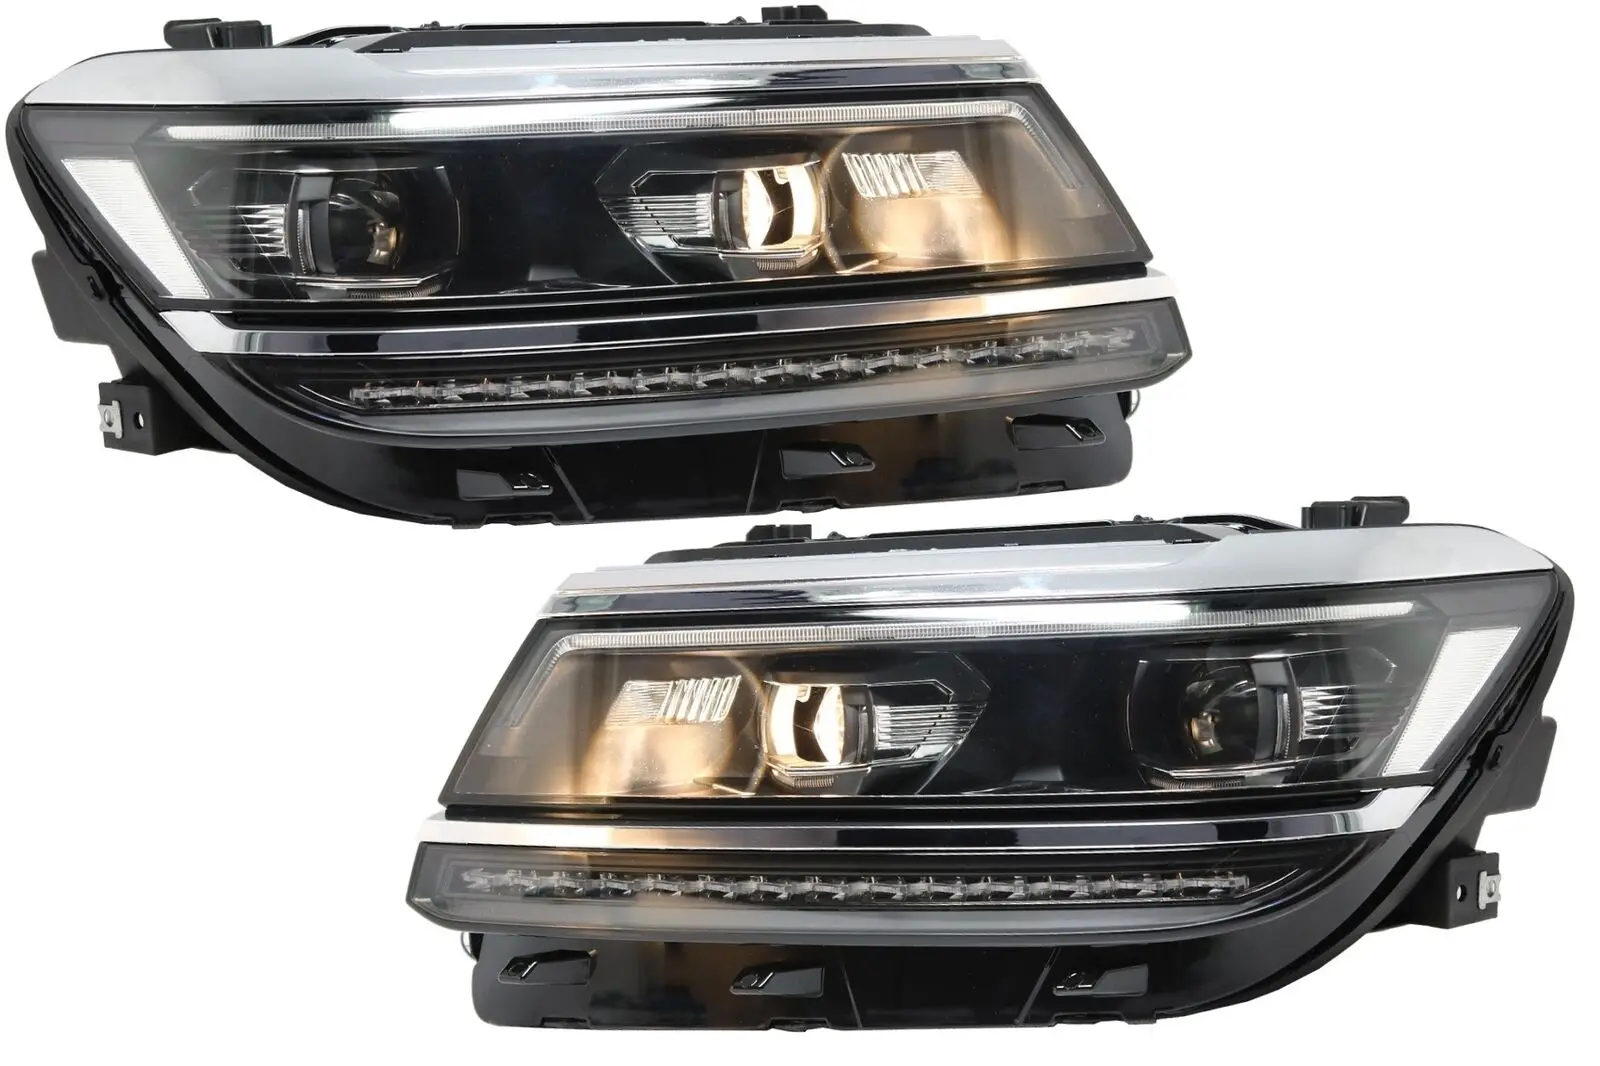 Source LED Headlights for VW Tiguan Mk2 16-19 R-Line Matrix Look Sequential Dynamic on m.alibaba.com